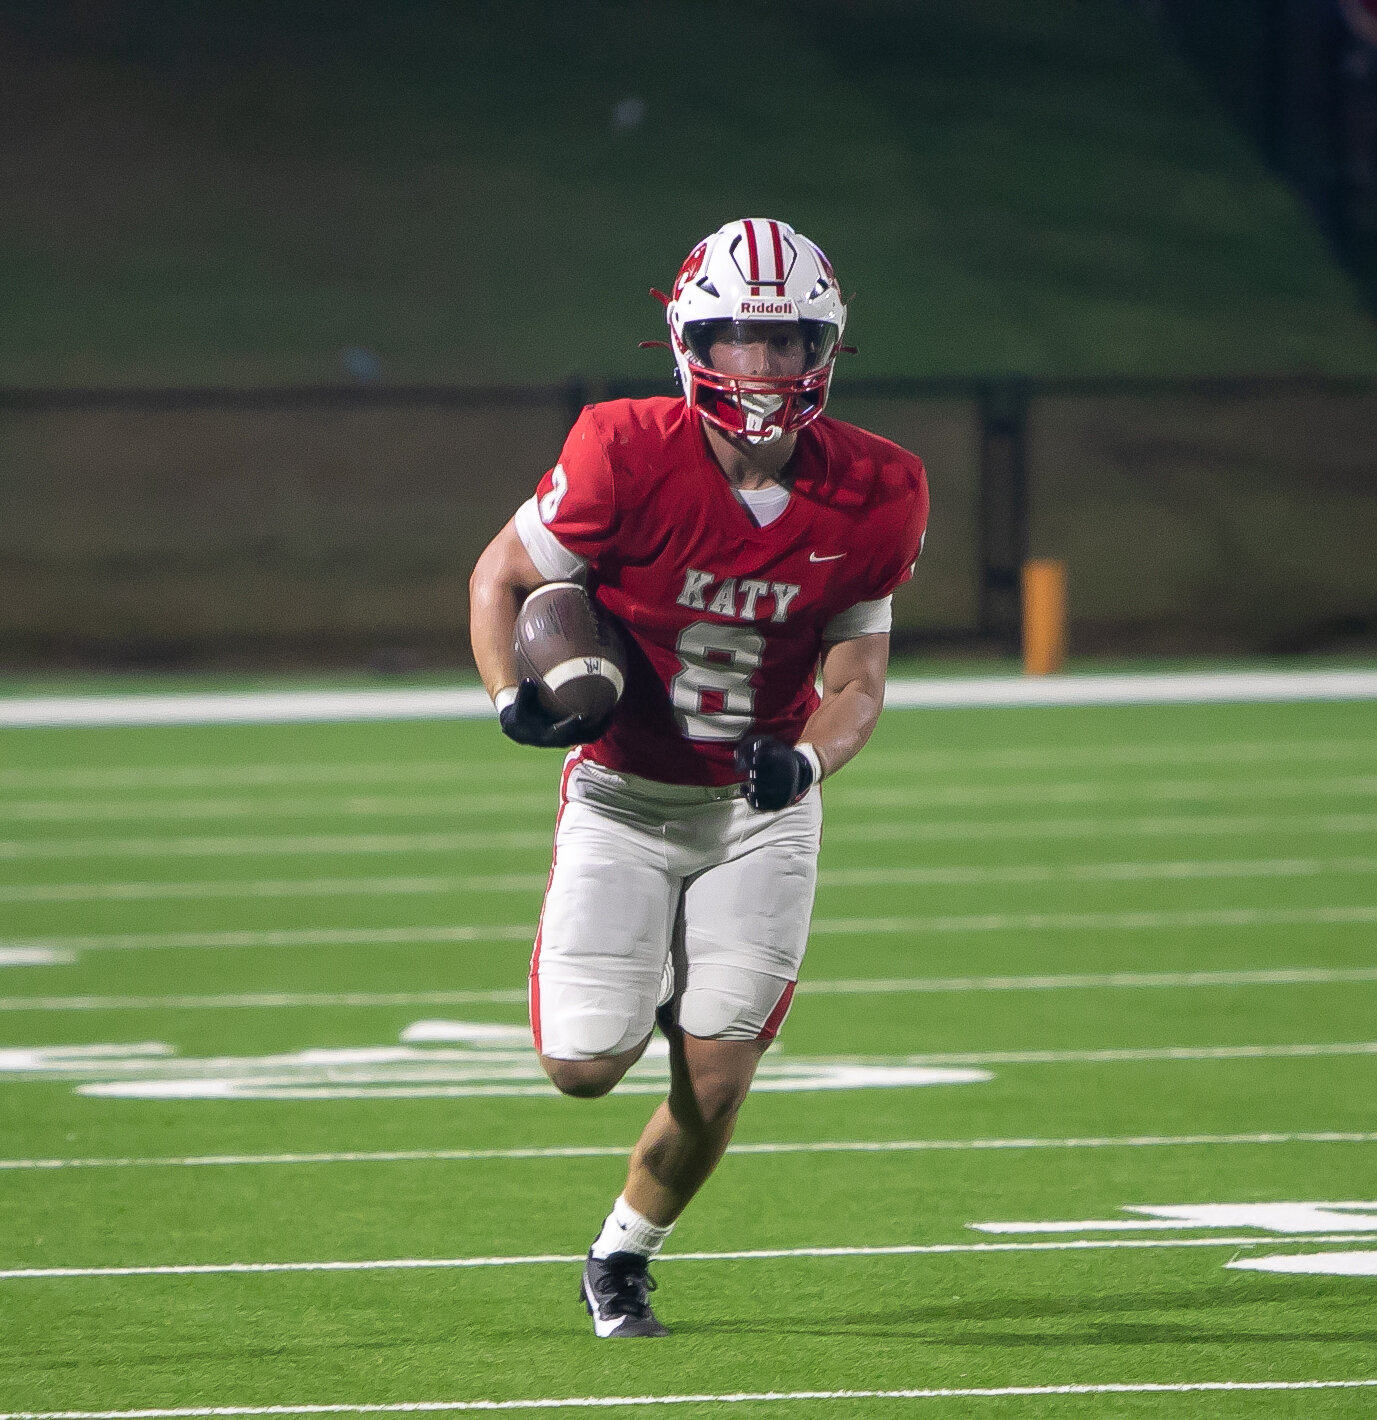 Chase Johnsey finds open room to run during Saturday's game between Katy and Clear Springs at Rhodes Stadium.